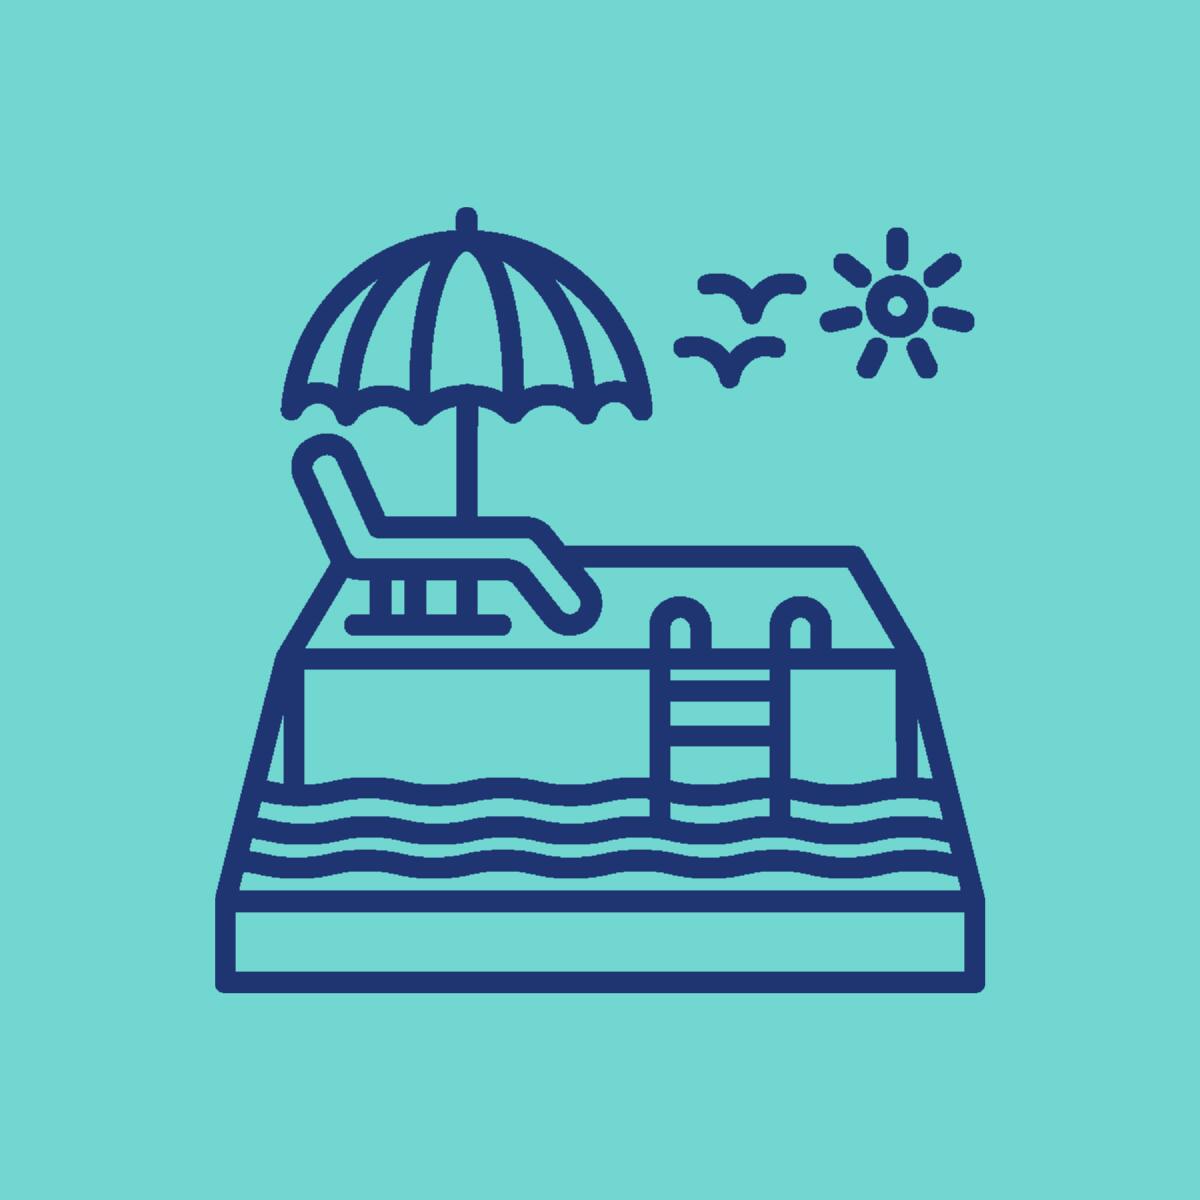 Pictogram of a sunny pool setting.